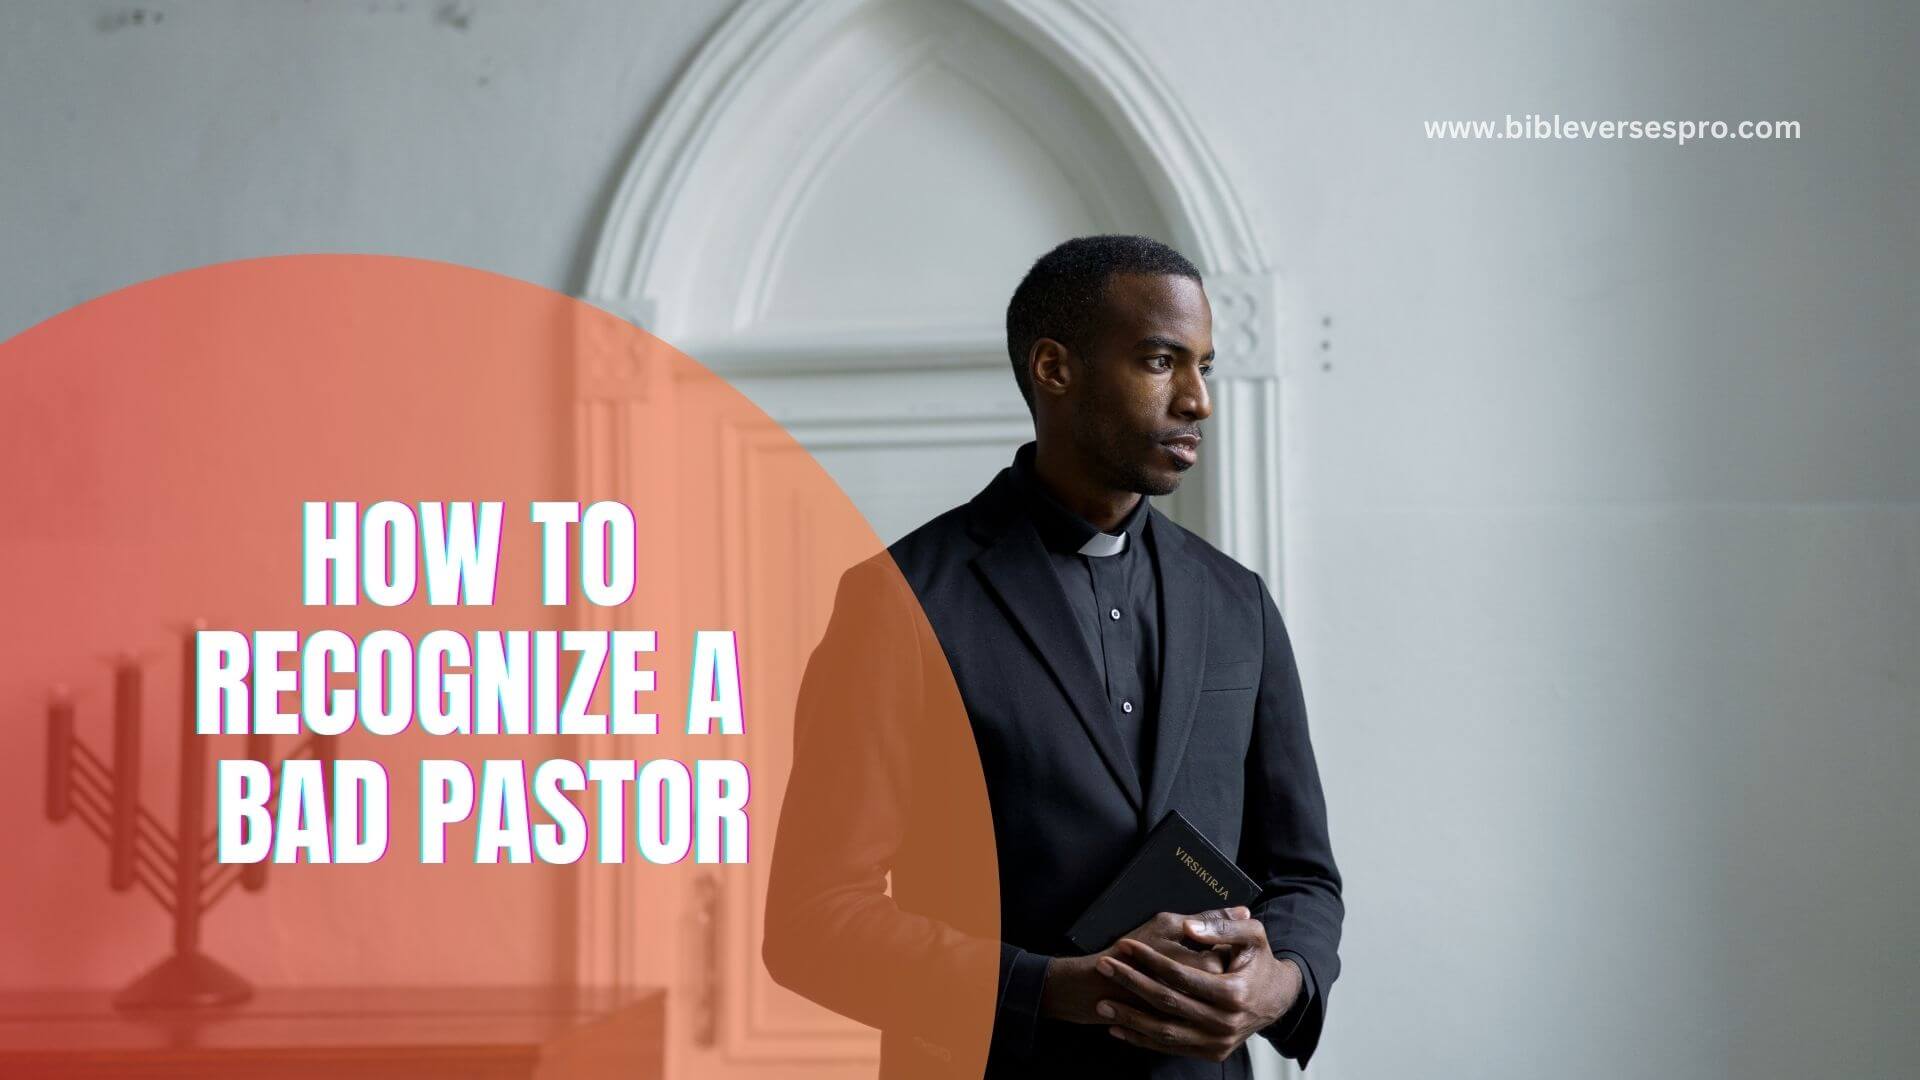 HOW TO RECOGNIZE A BAD PASTOR (1)